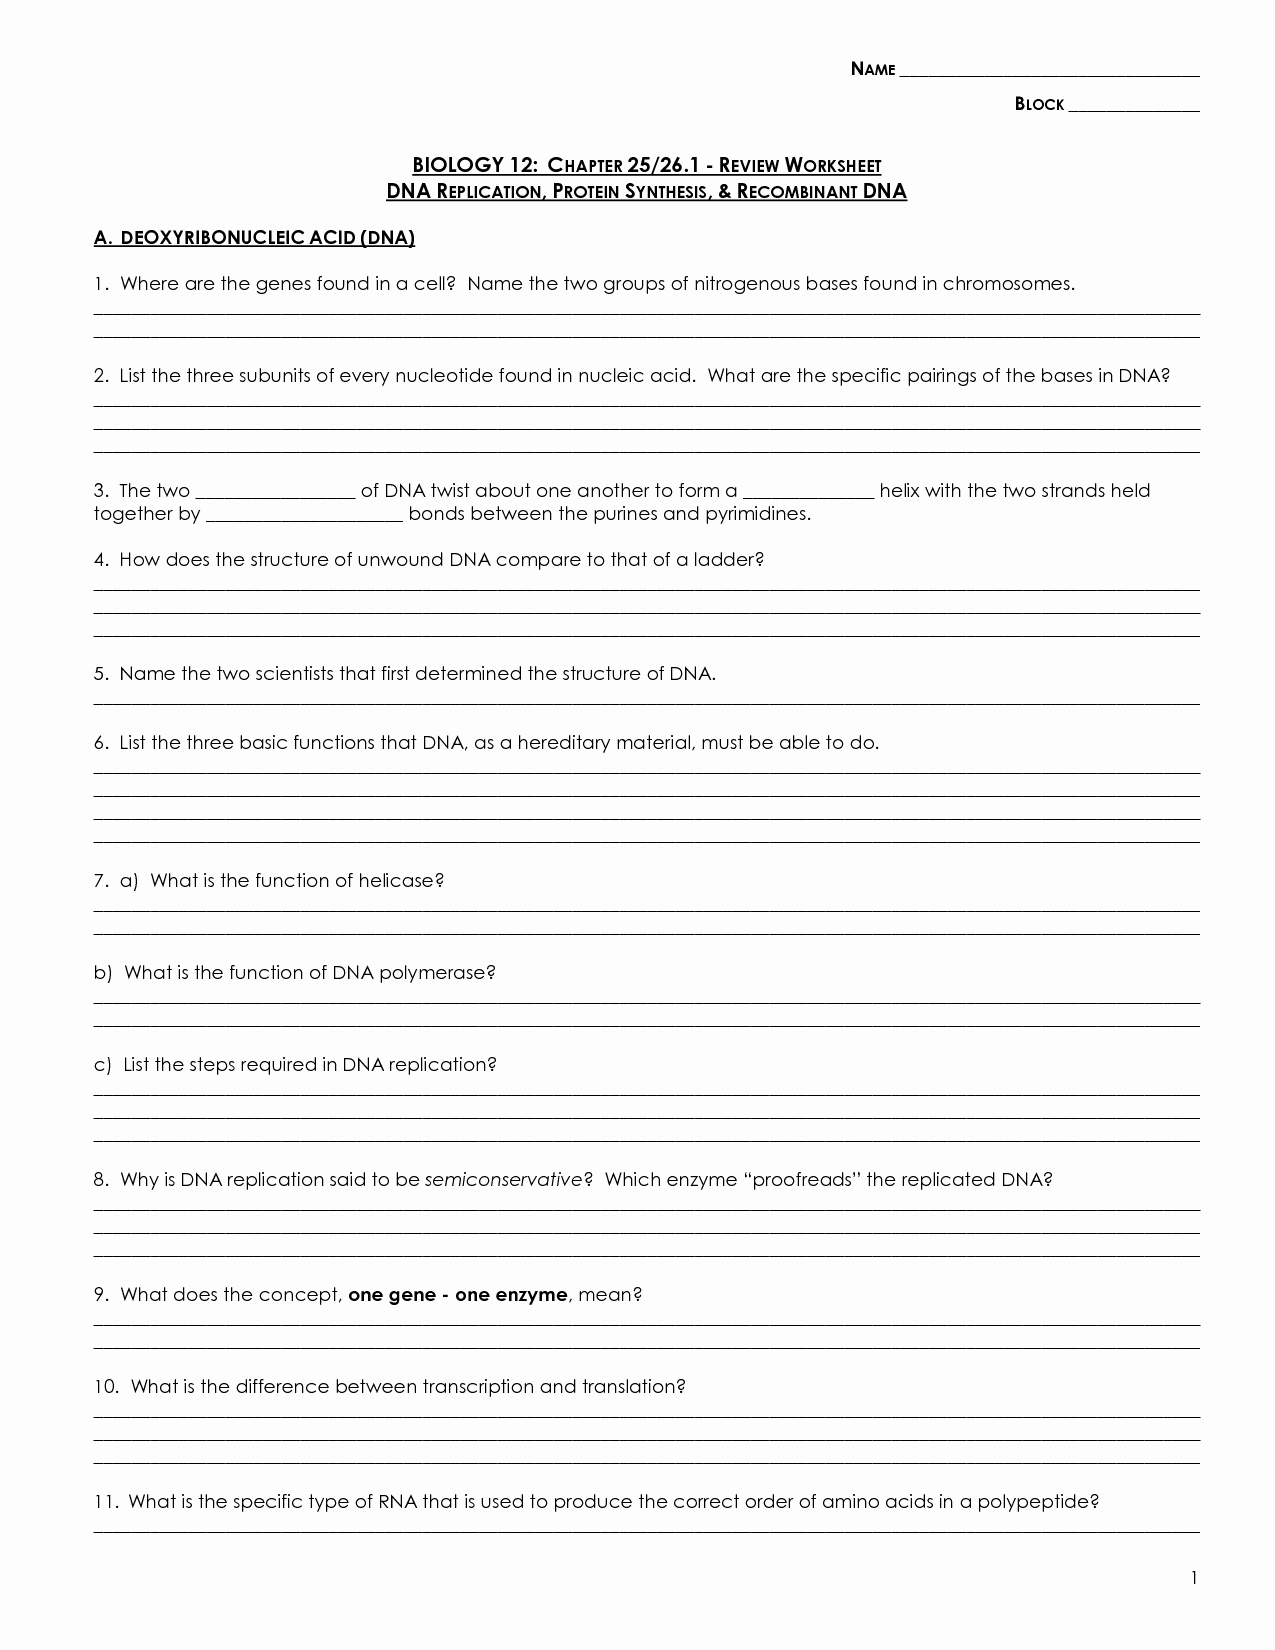 Dna and Replication Worksheet Answers Elegant 19 Best Of Dna Replication Structure Worksheet and